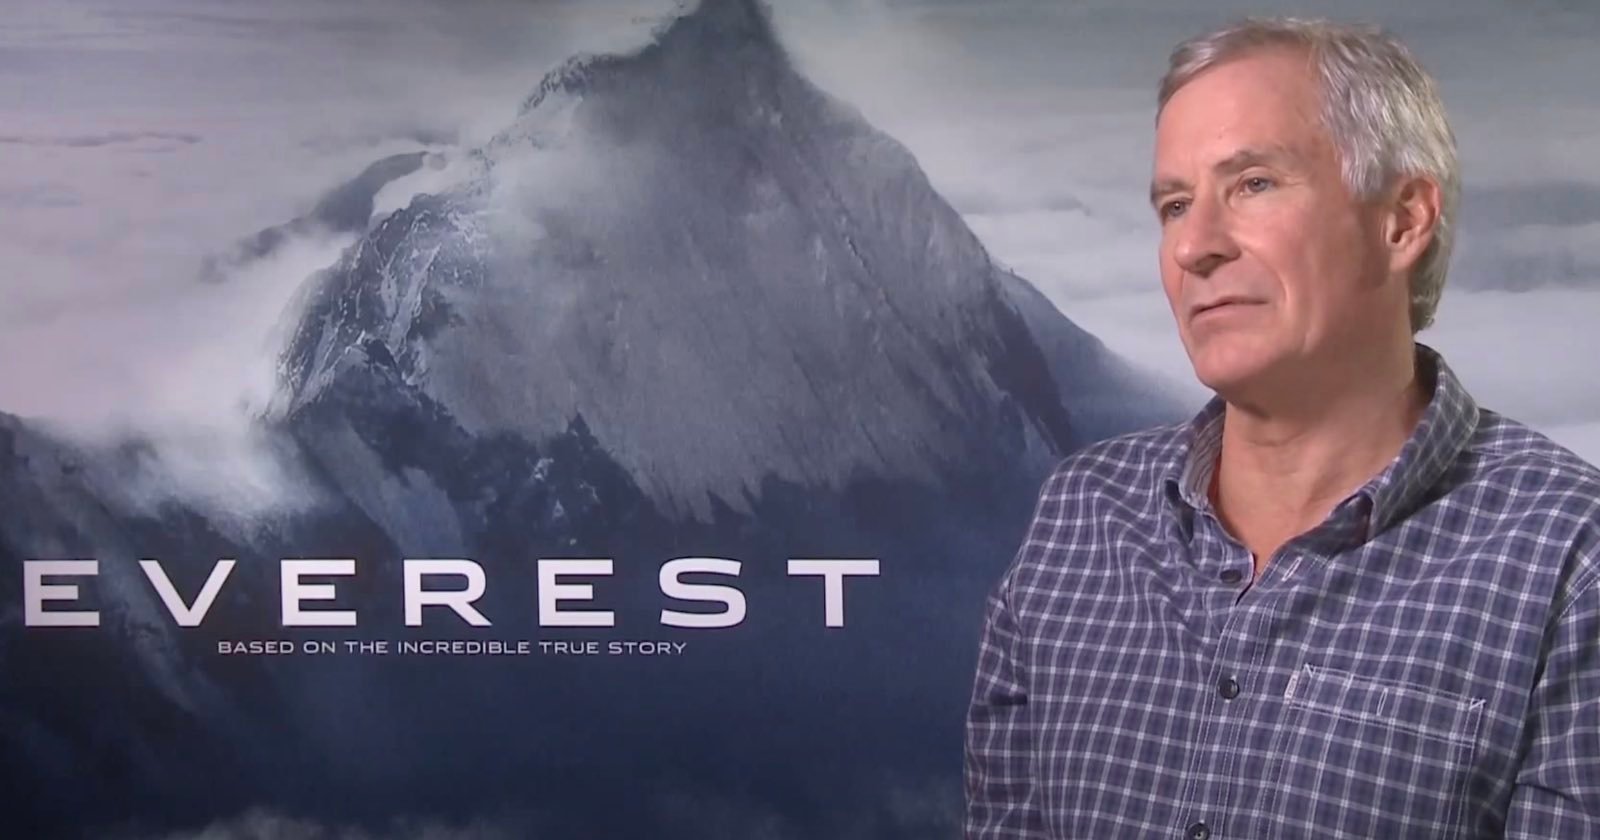  cinematographer who braved everest specially built imax 